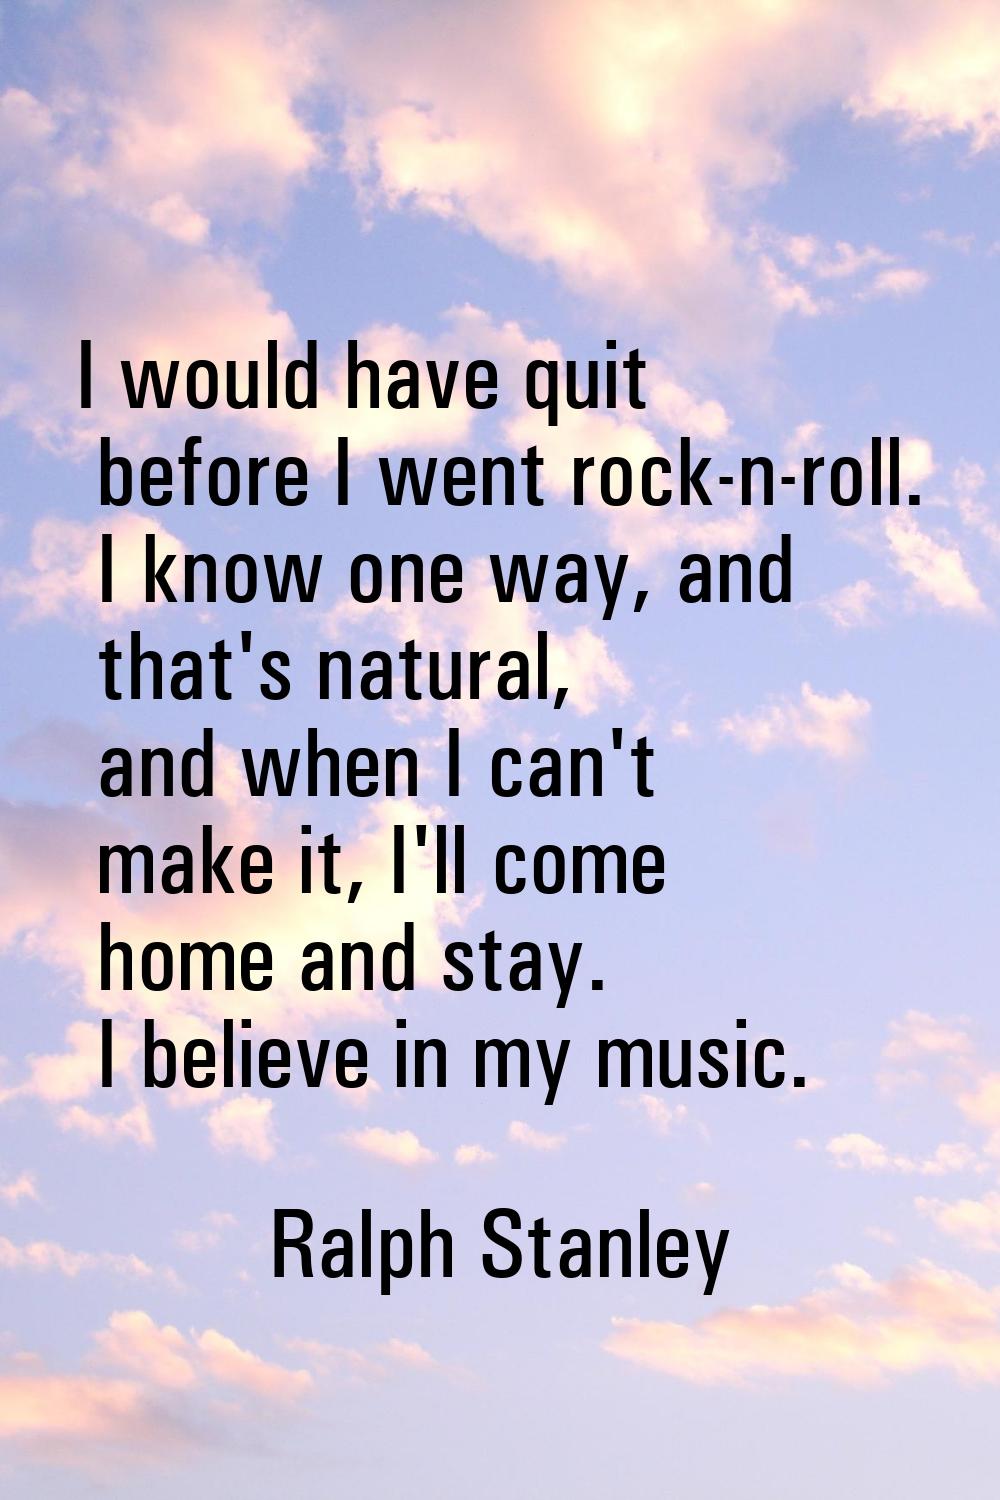 I would have quit before I went rock-n-roll. I know one way, and that's natural, and when I can't m